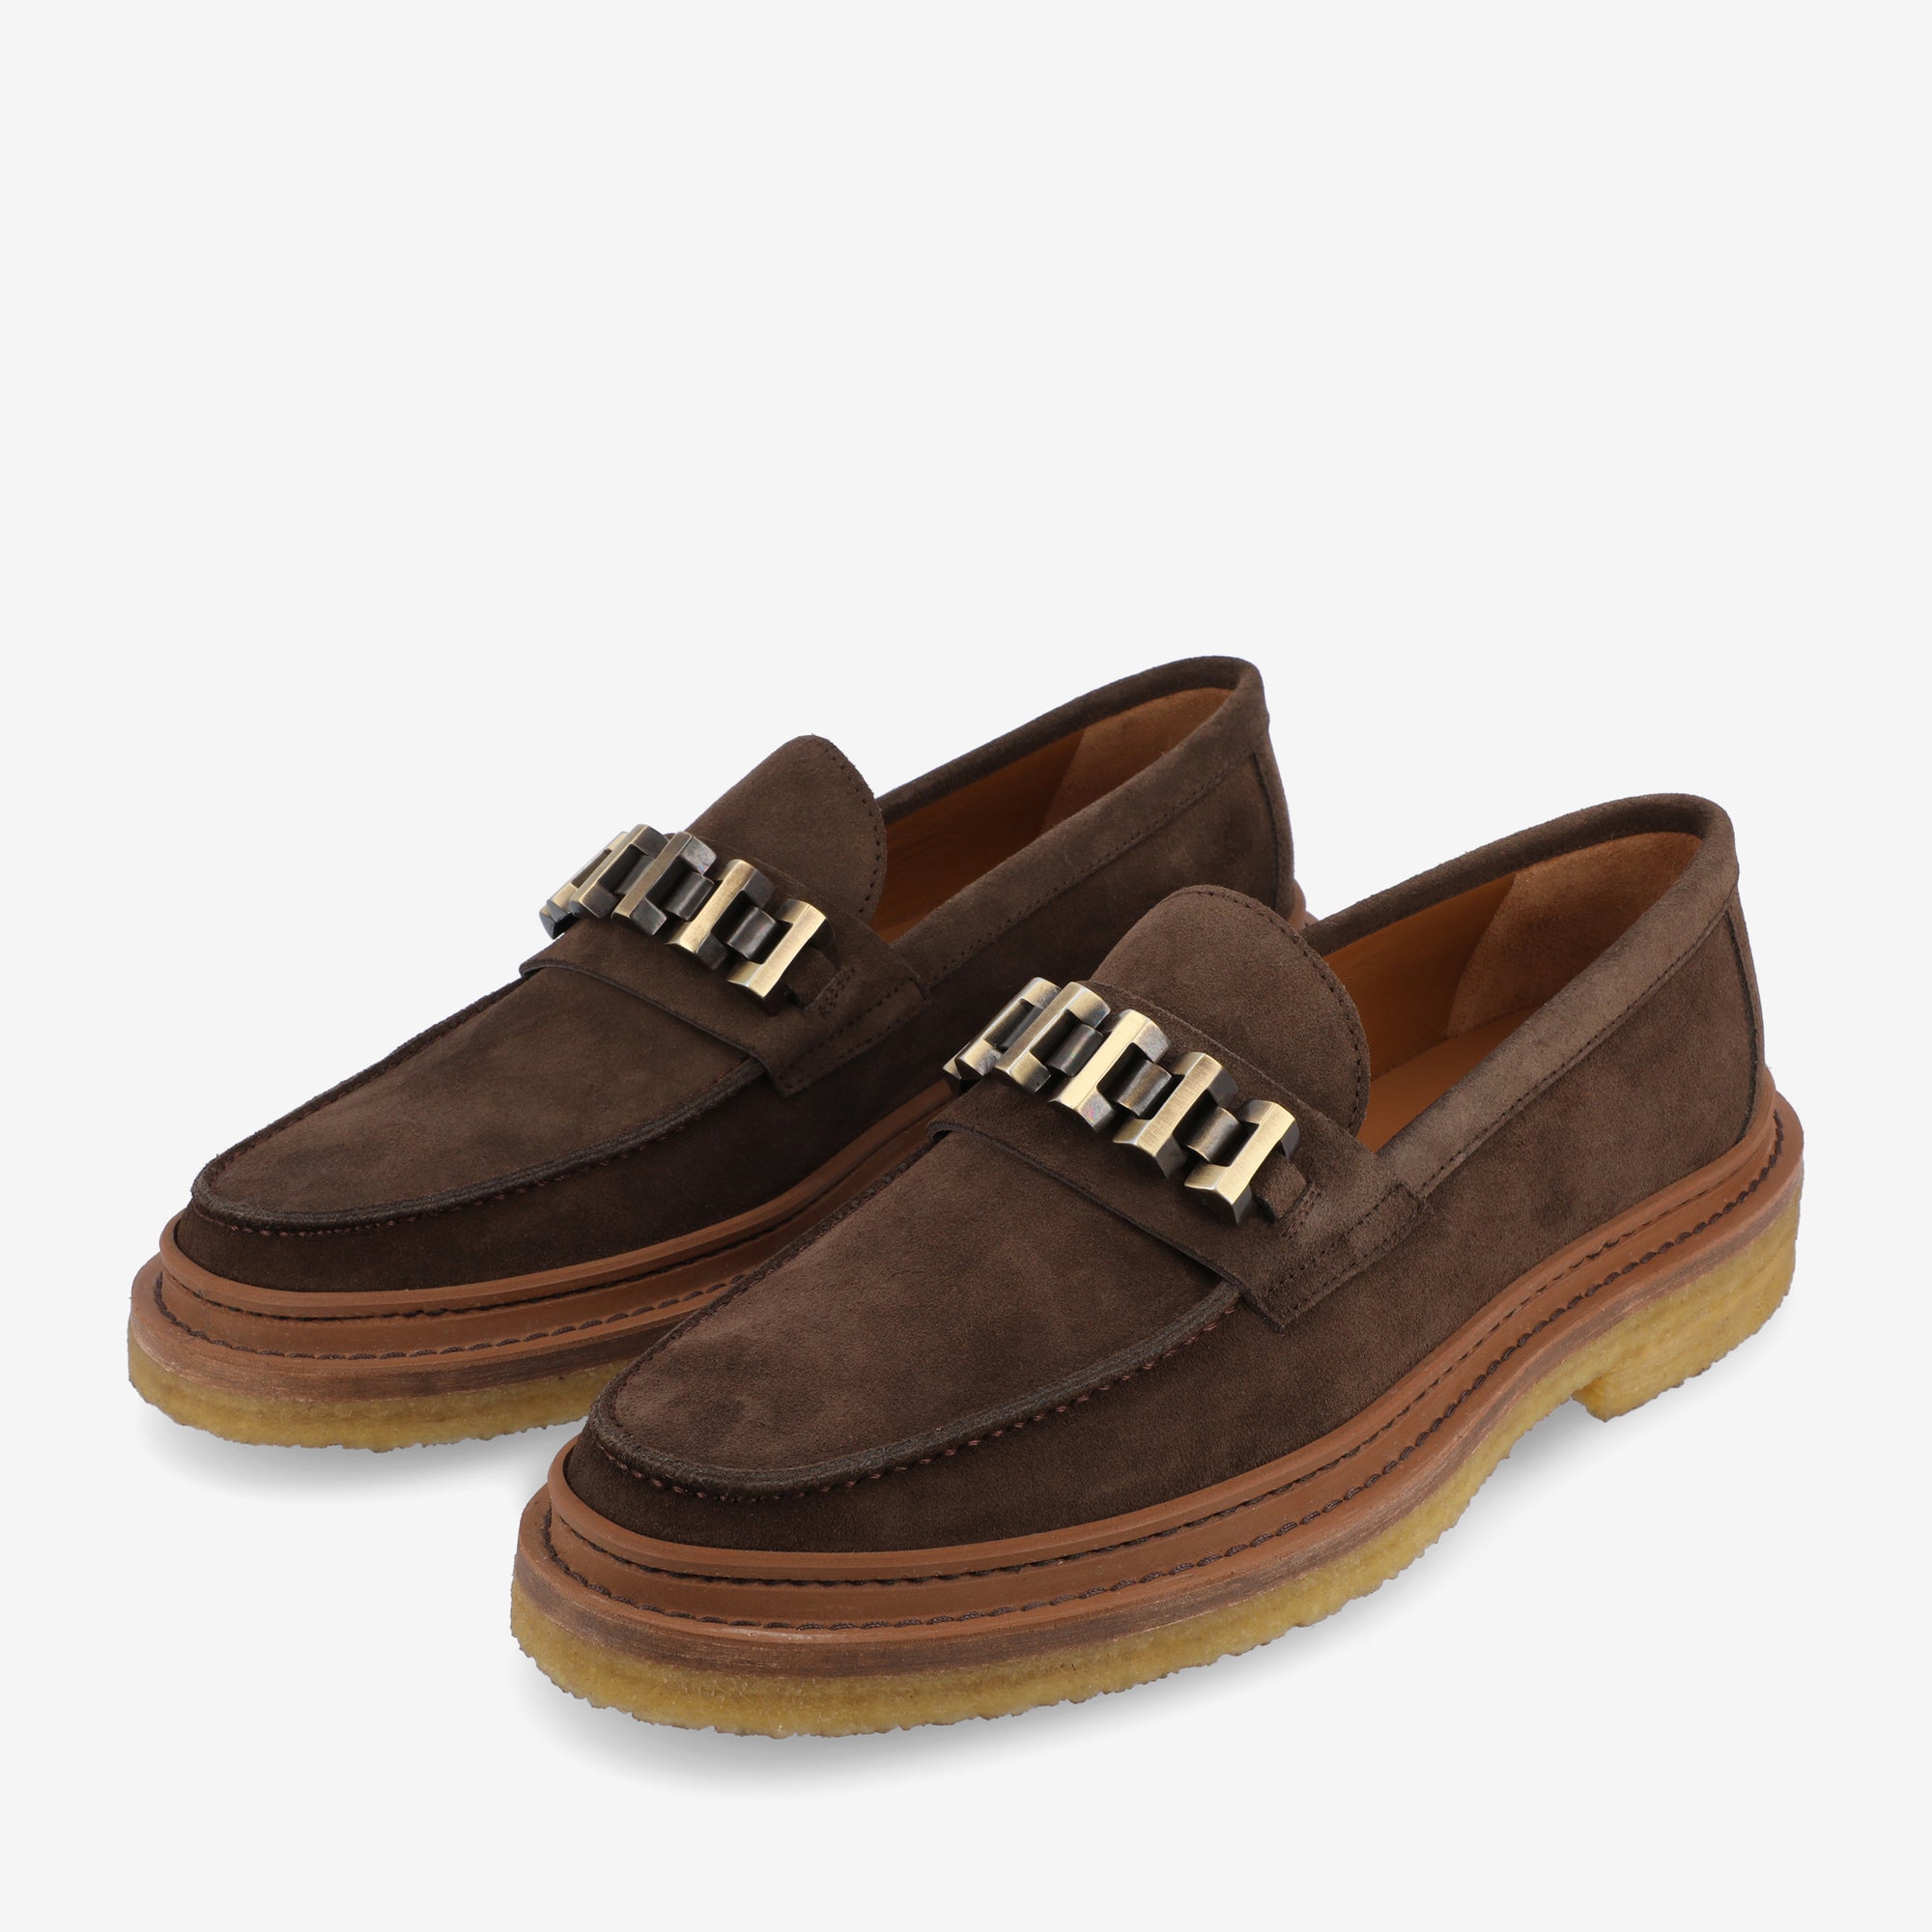 The Verona Loafer in Brown